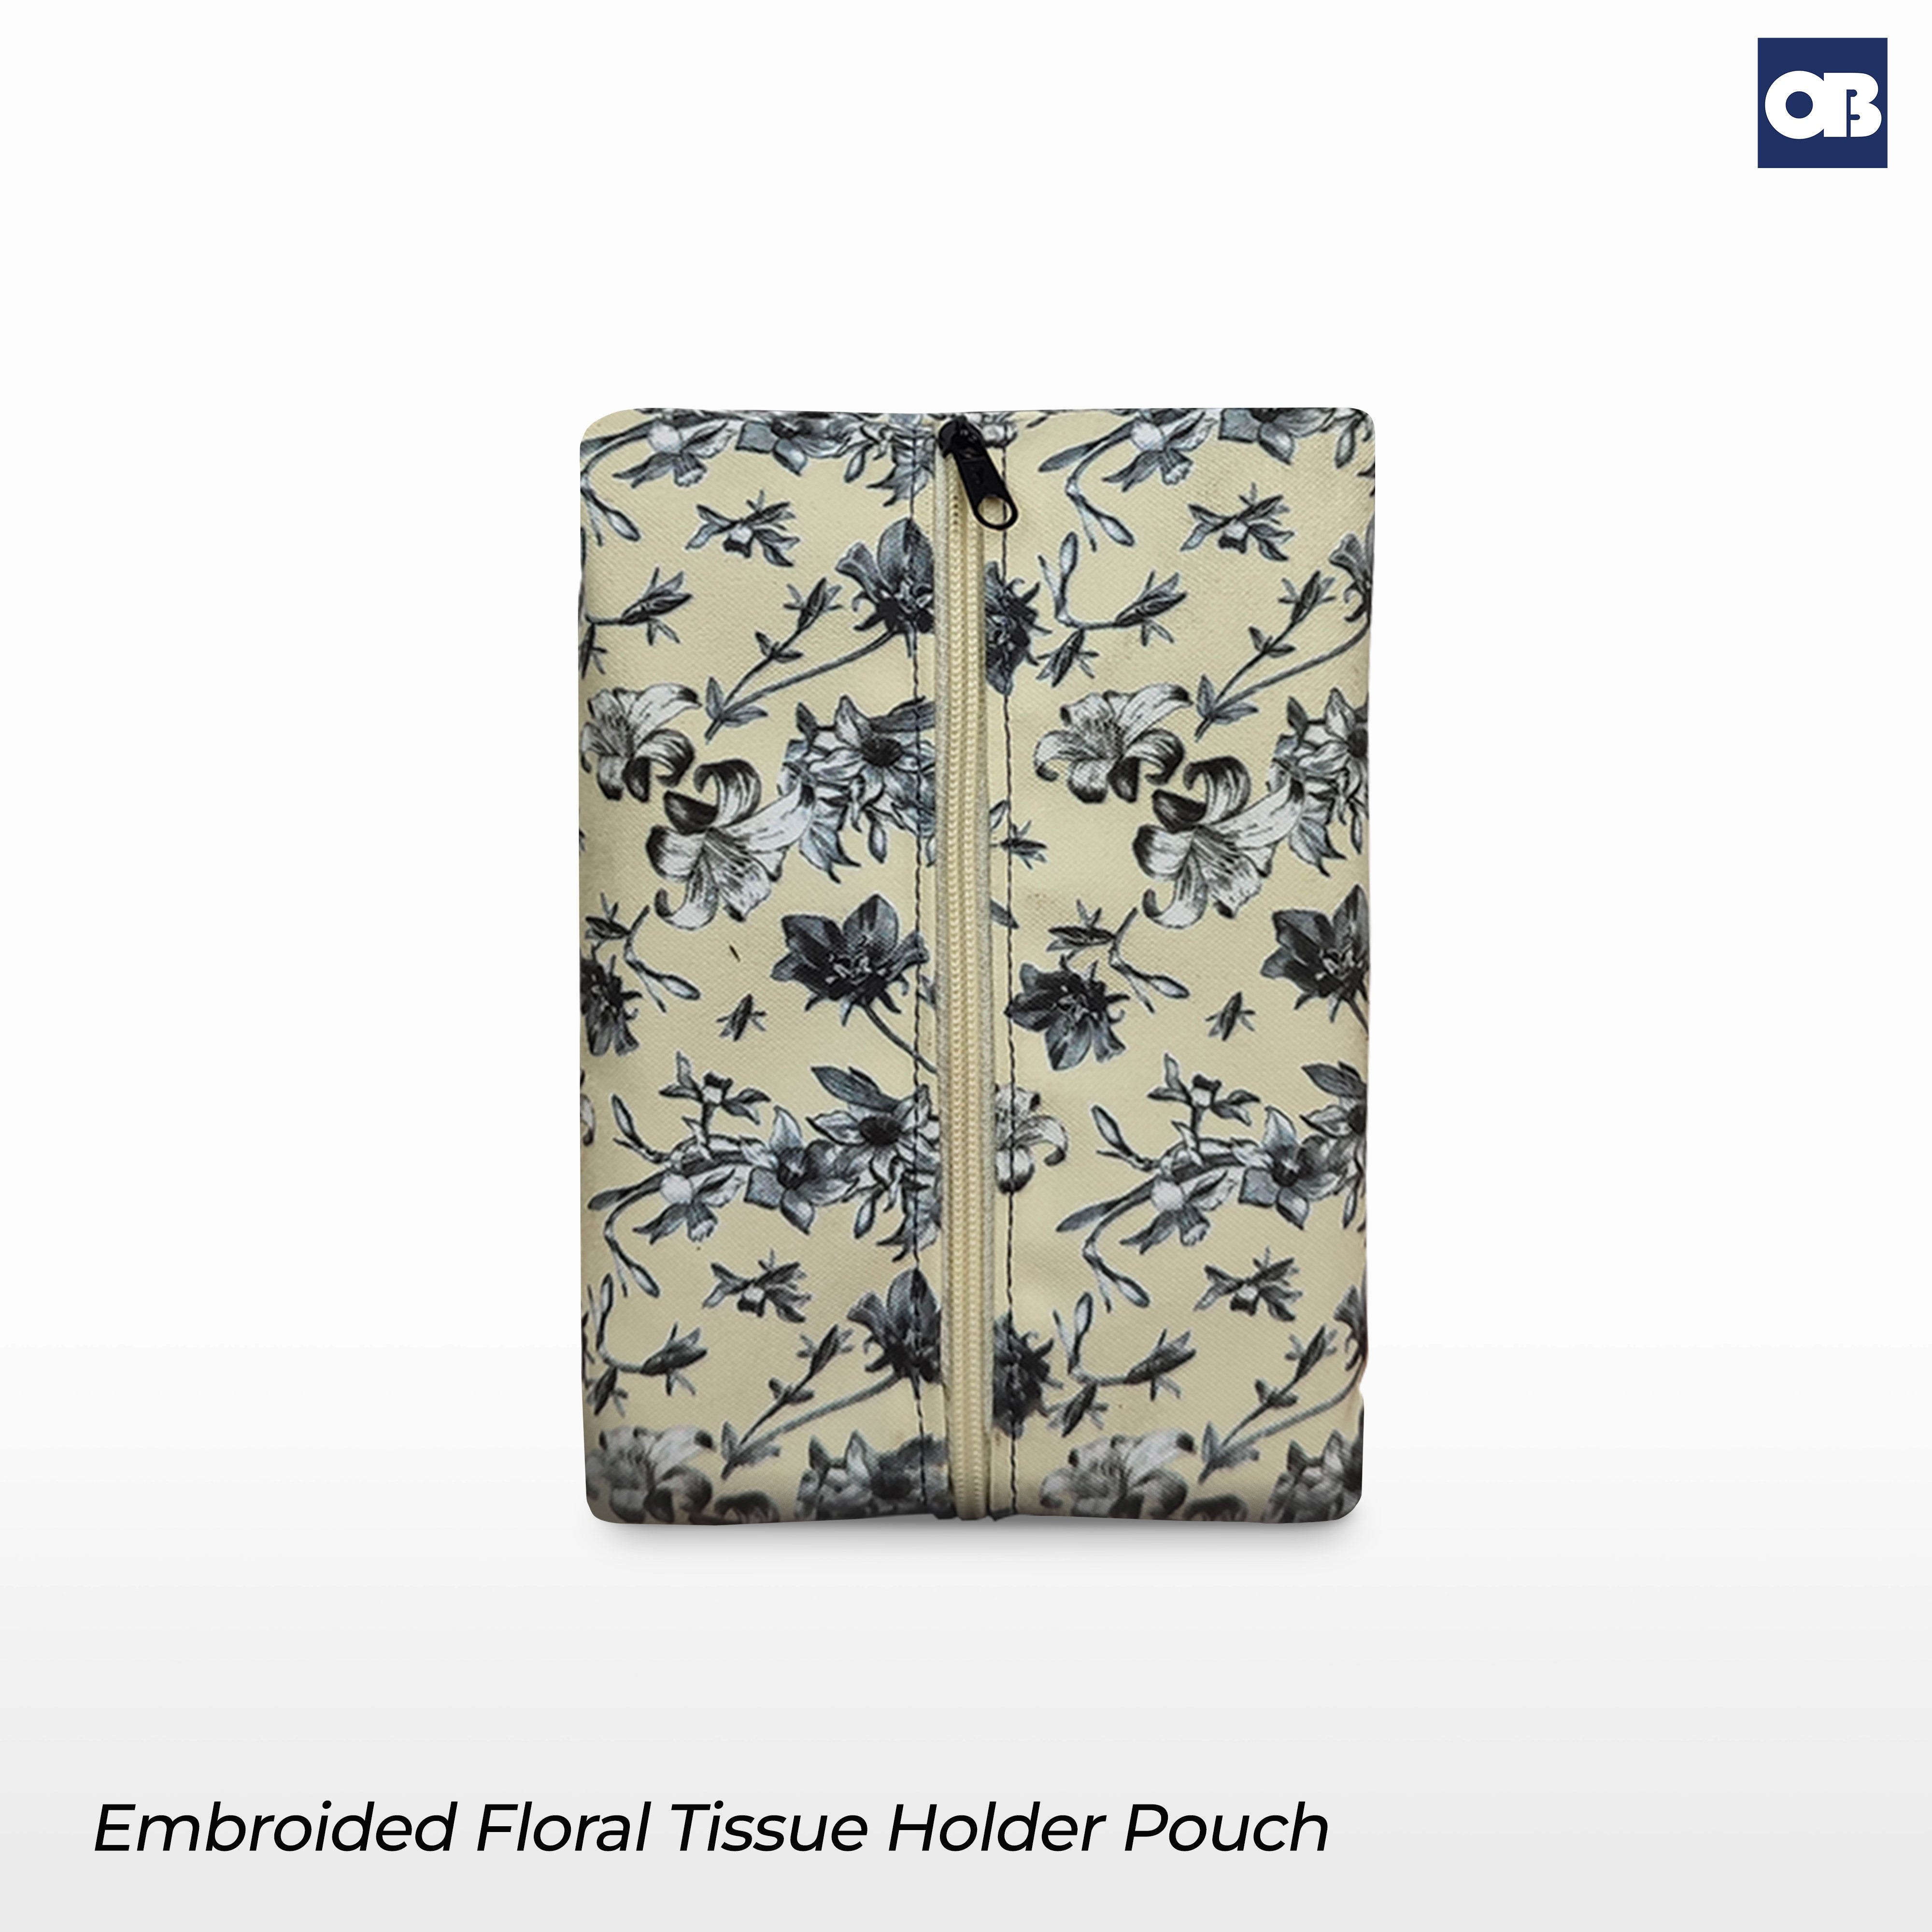 OB Embroider Floral Tissue Holder Pouch